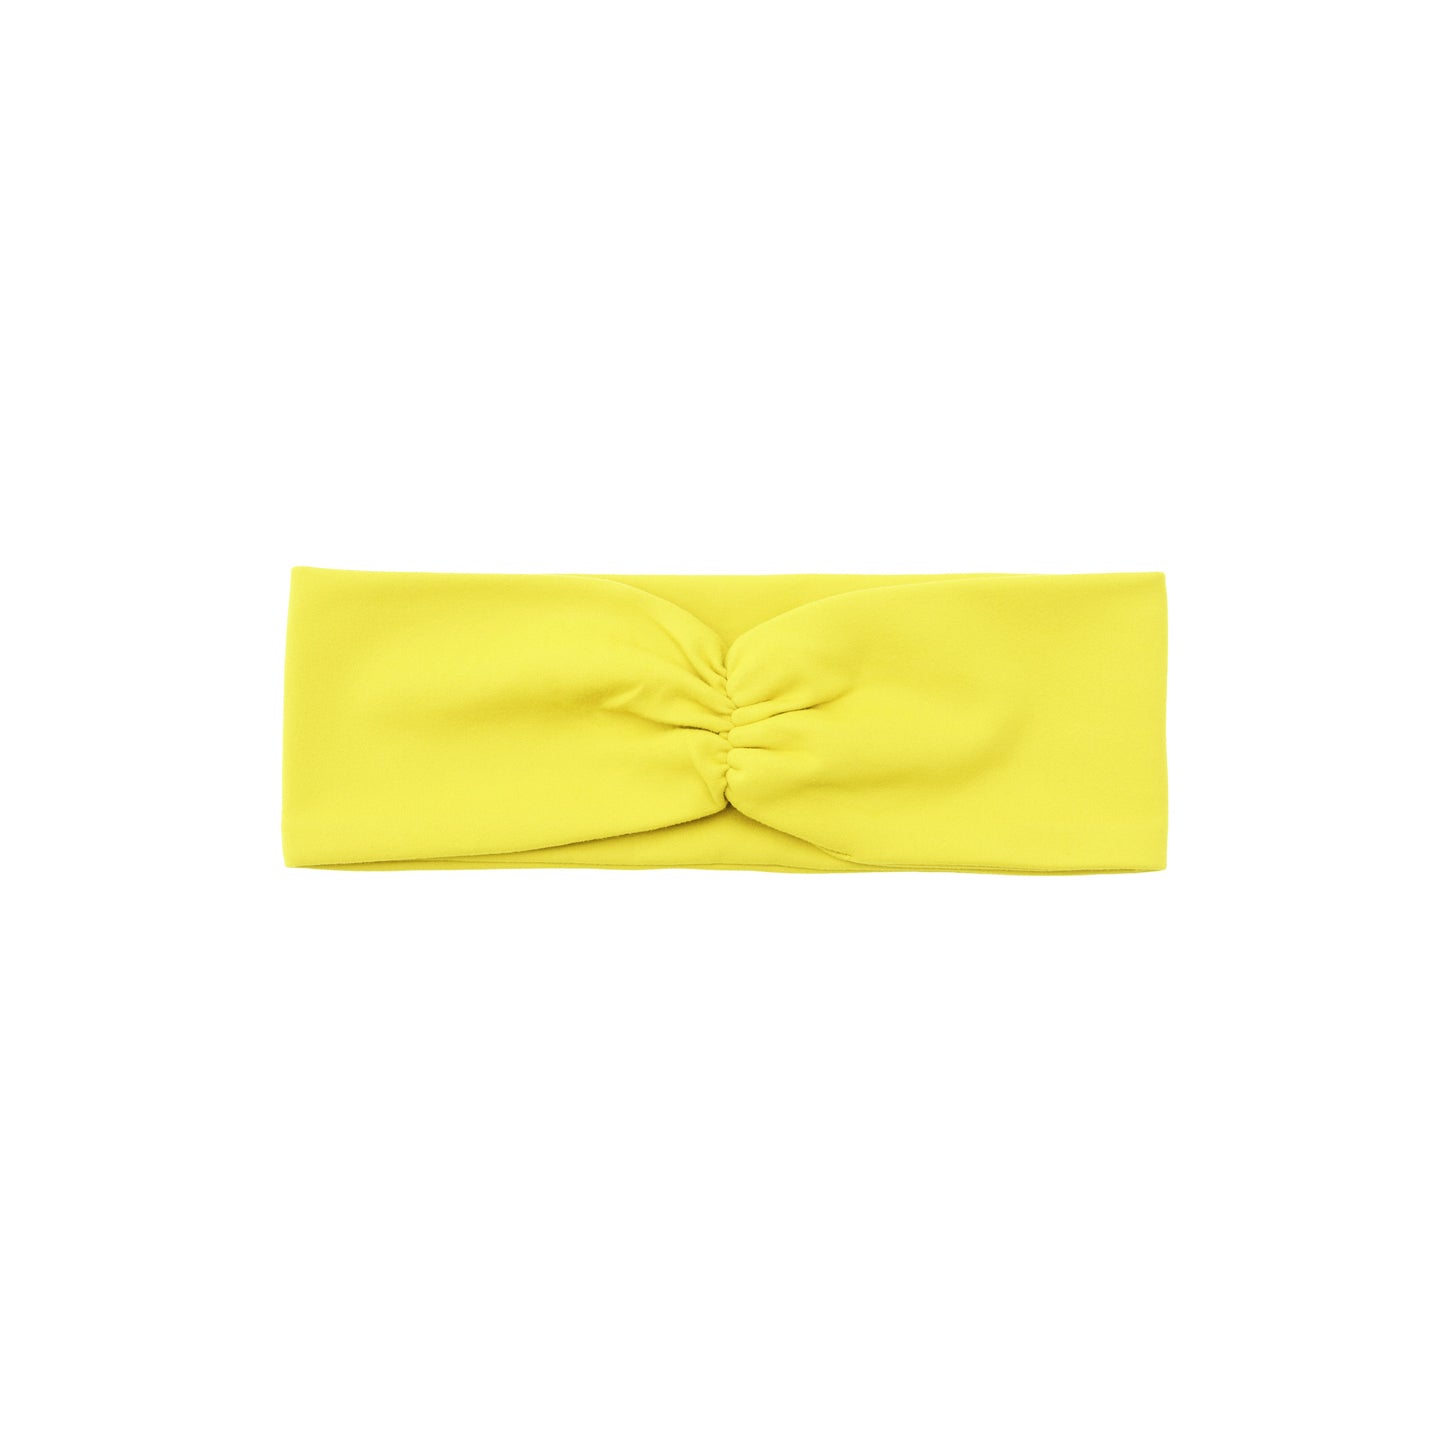 Colorful wild rice yellow headband with OLABEN logo, perfect for adding a stylish touch.